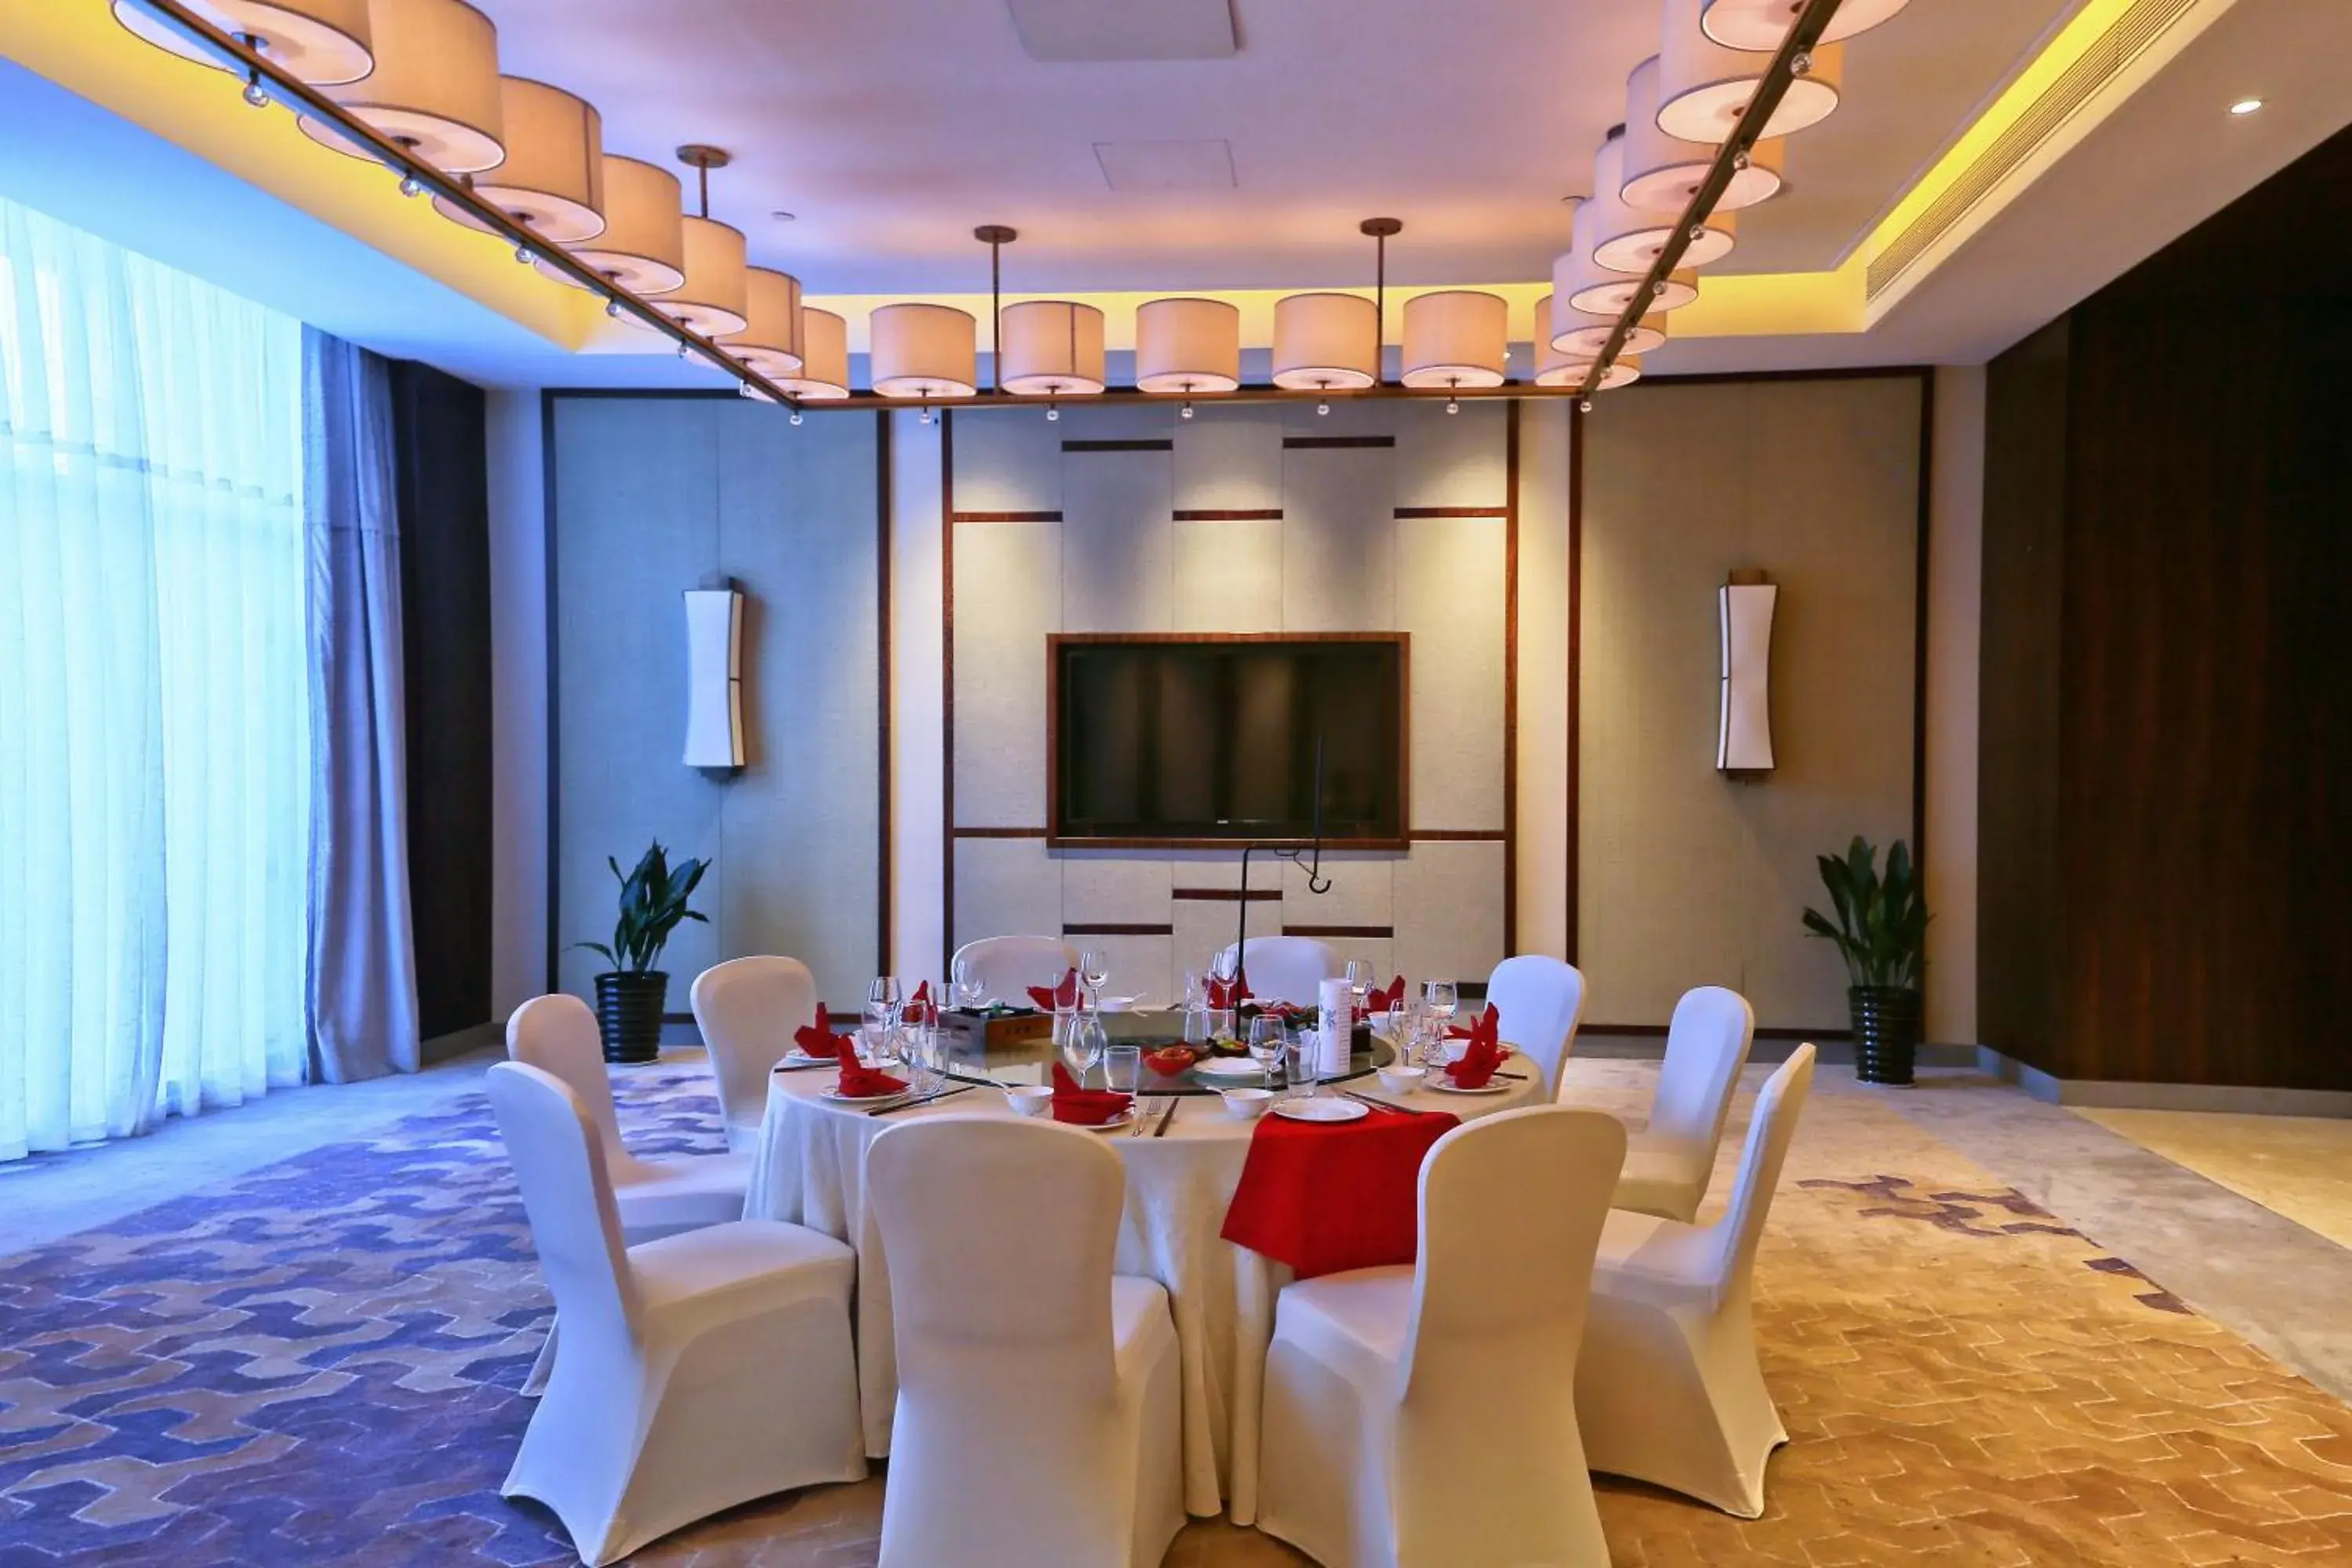 Meeting/conference room, Banquet Facilities in Neodalle Zhangjiajie Wulingyuan